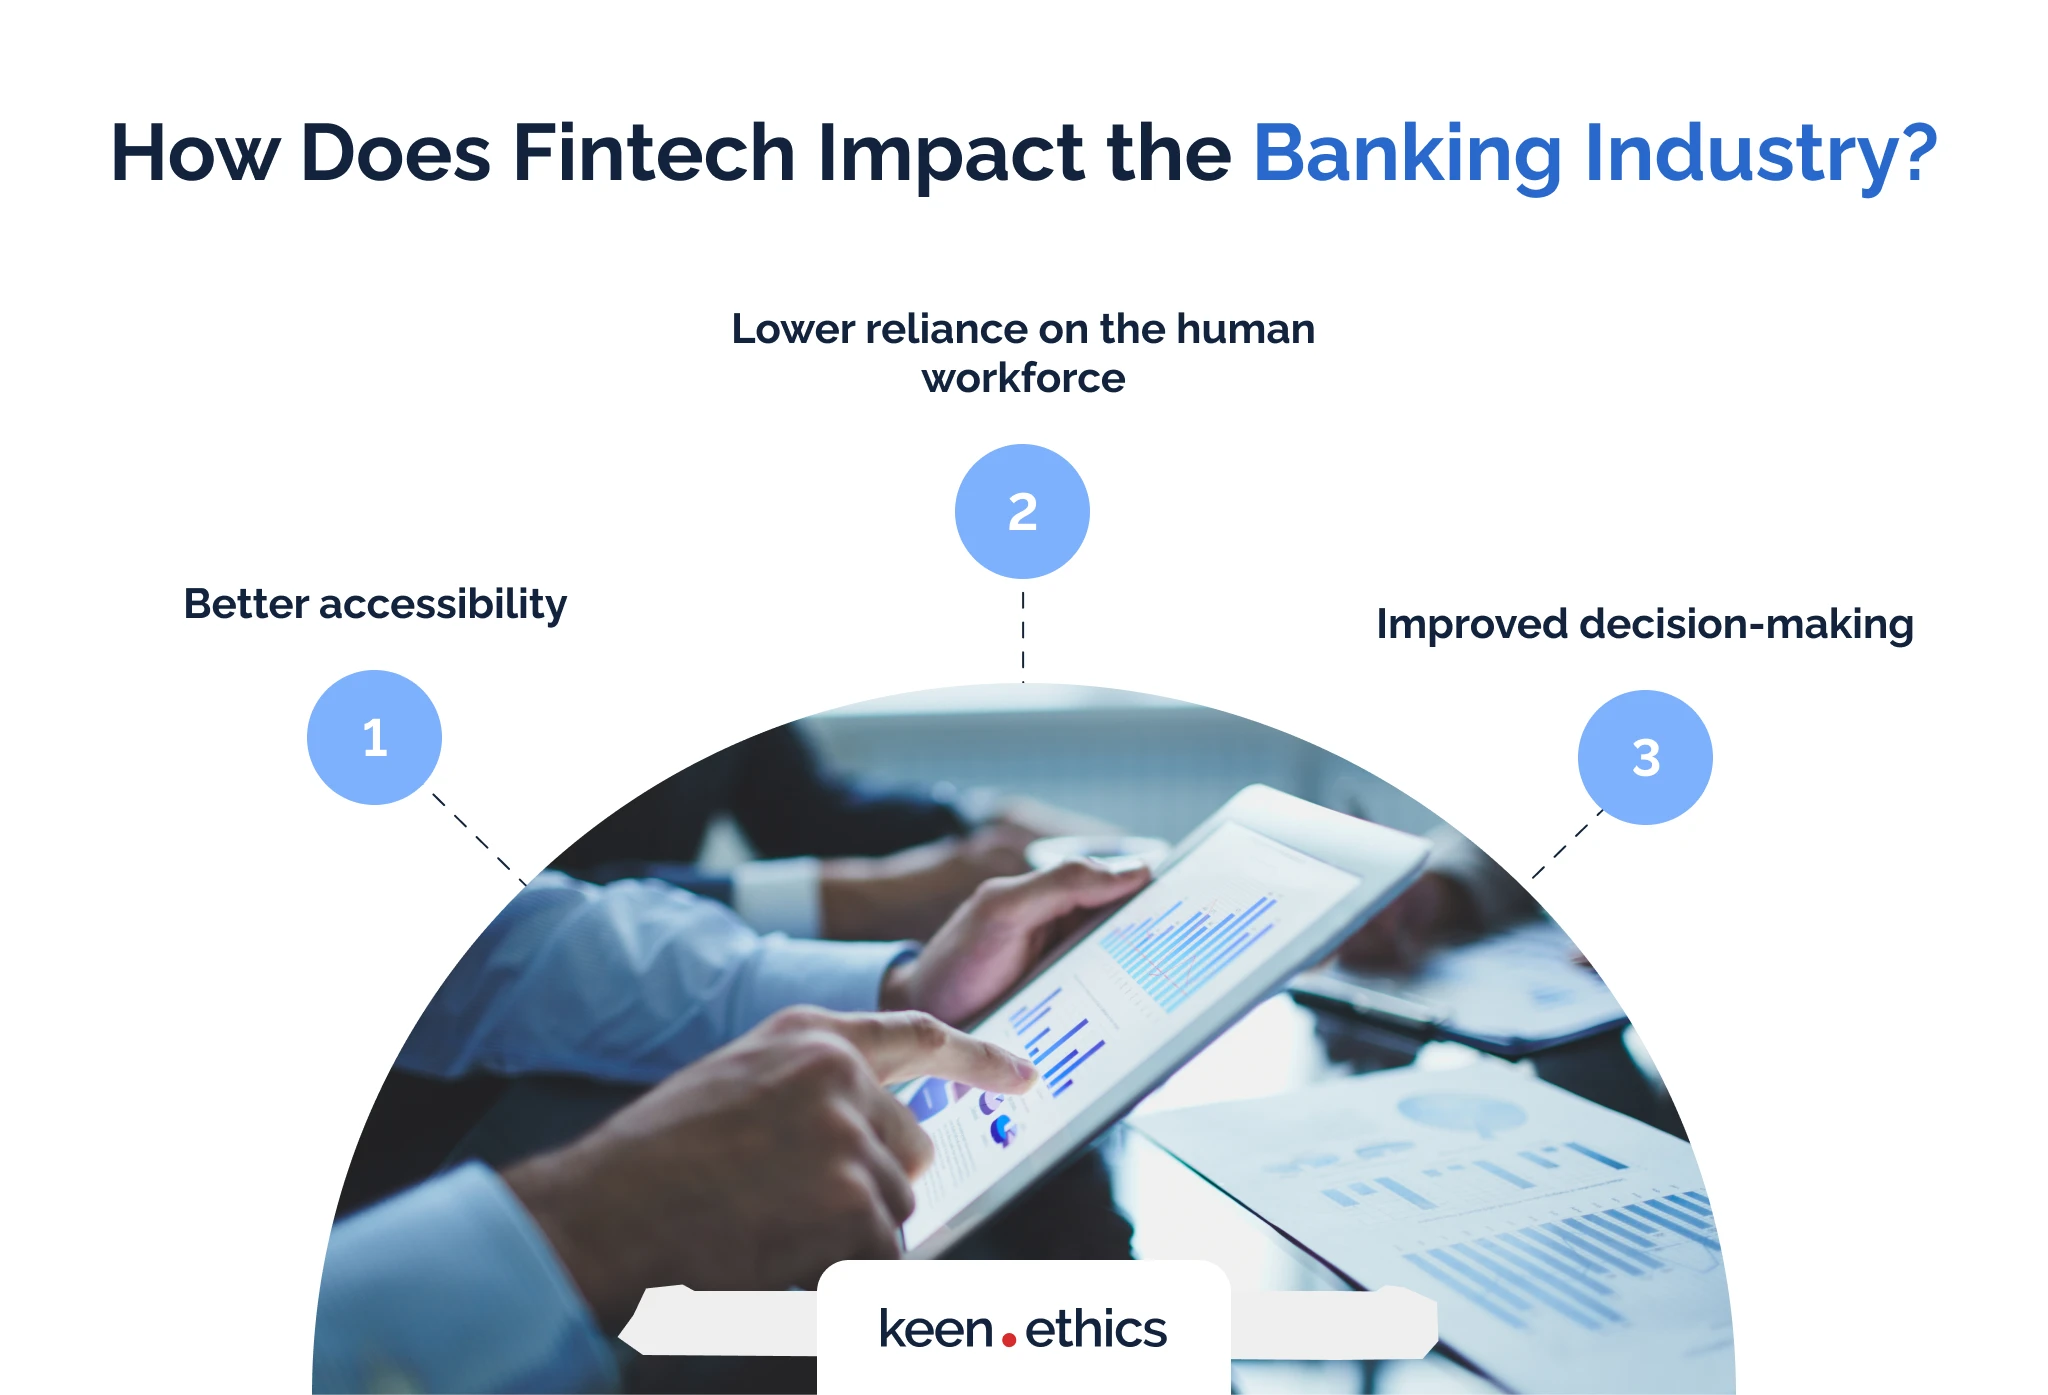 How does fintech impact the banking industry?